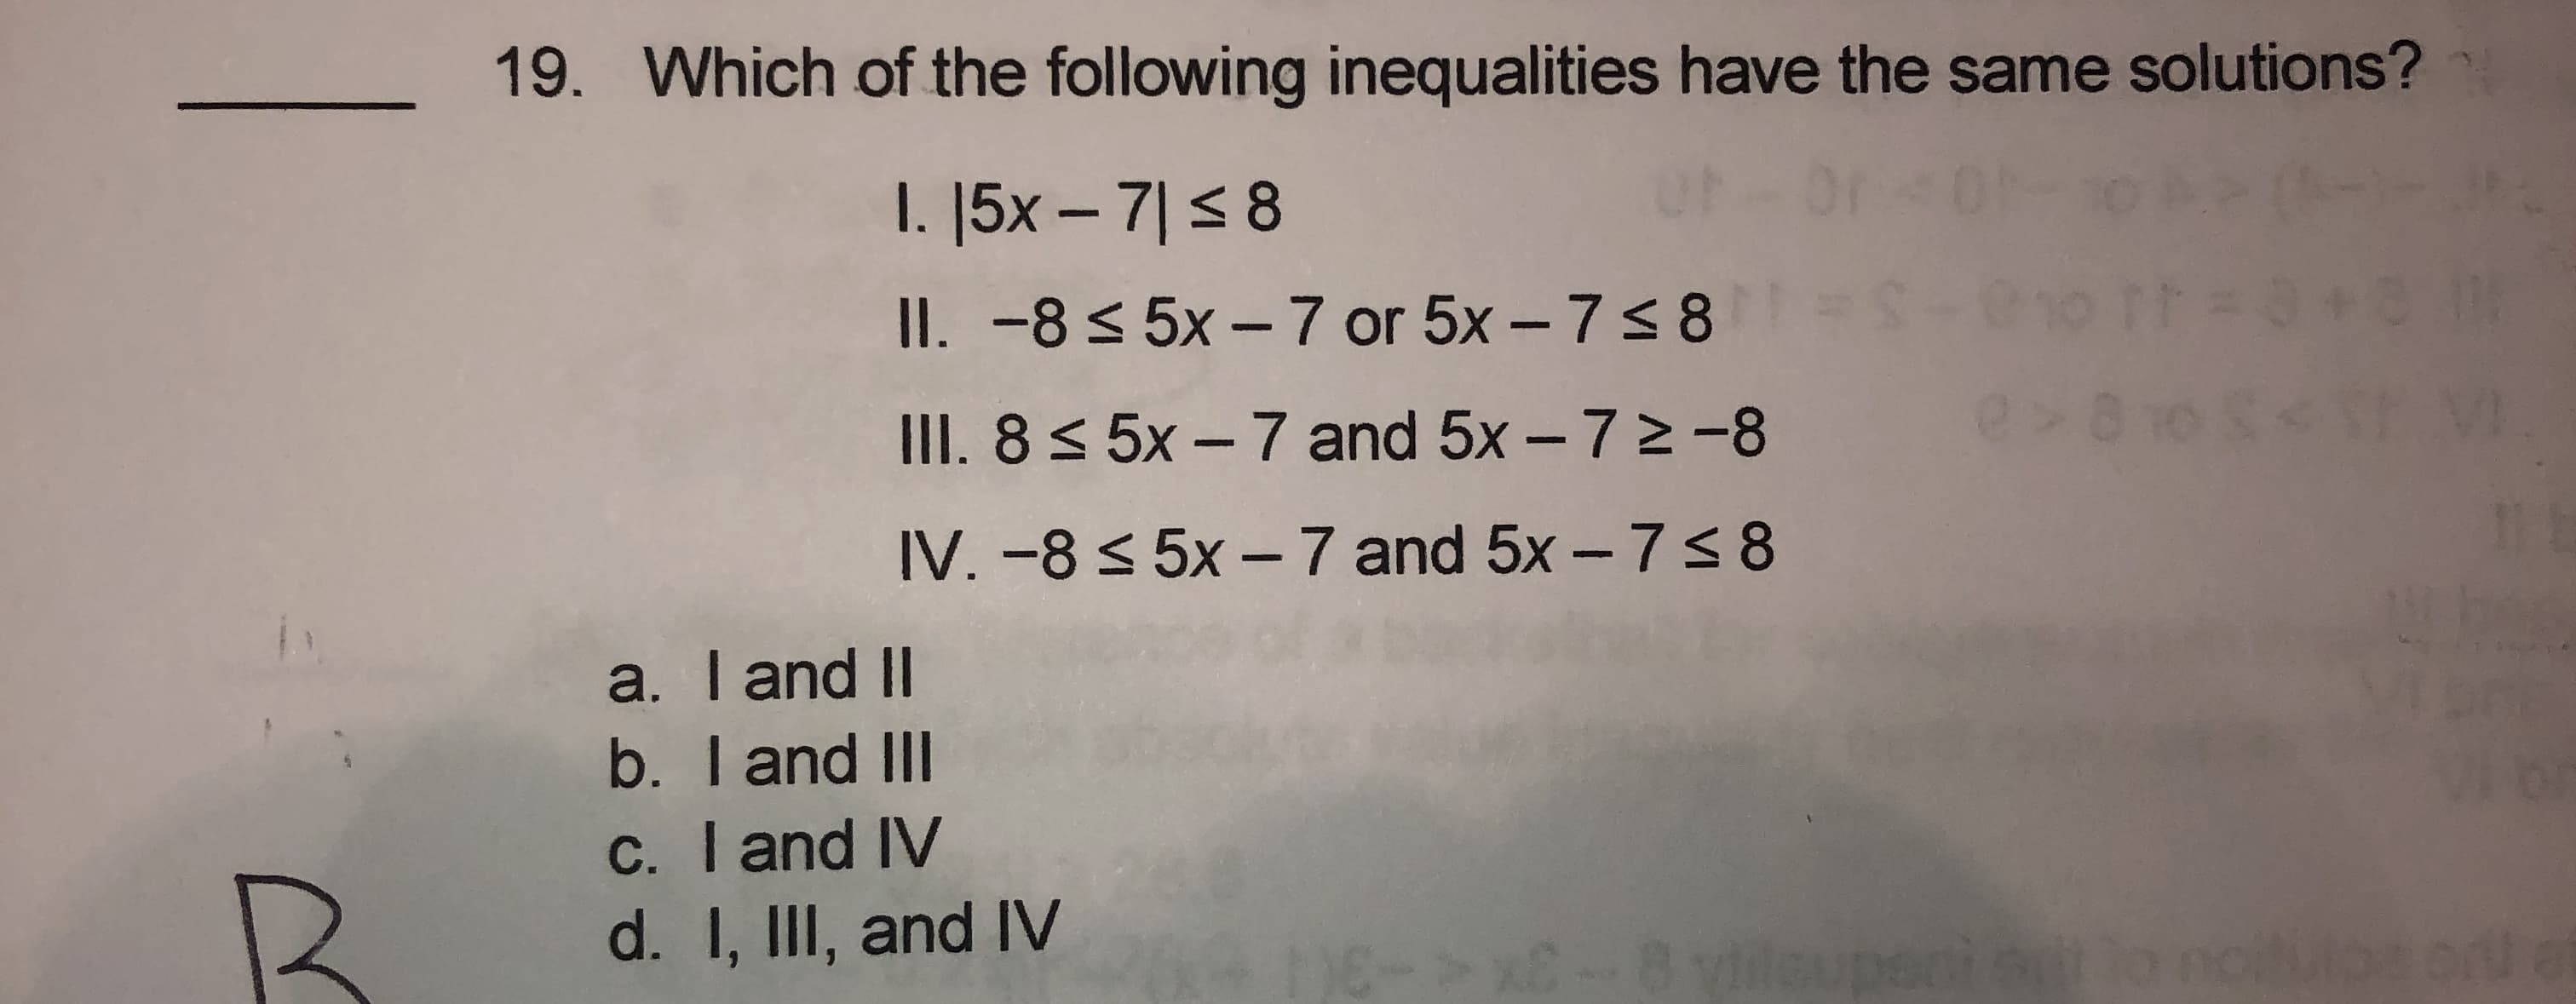 Which of the following inequalities have the same solutions?
I. |5x – 7|<8
II. -8 < 5x – 7 or 5x – 7s8 =
III. 8< 5x - 7 and 5x - 72 -8
IV. -8 < 5x – 7 and 5x – 7s 8
